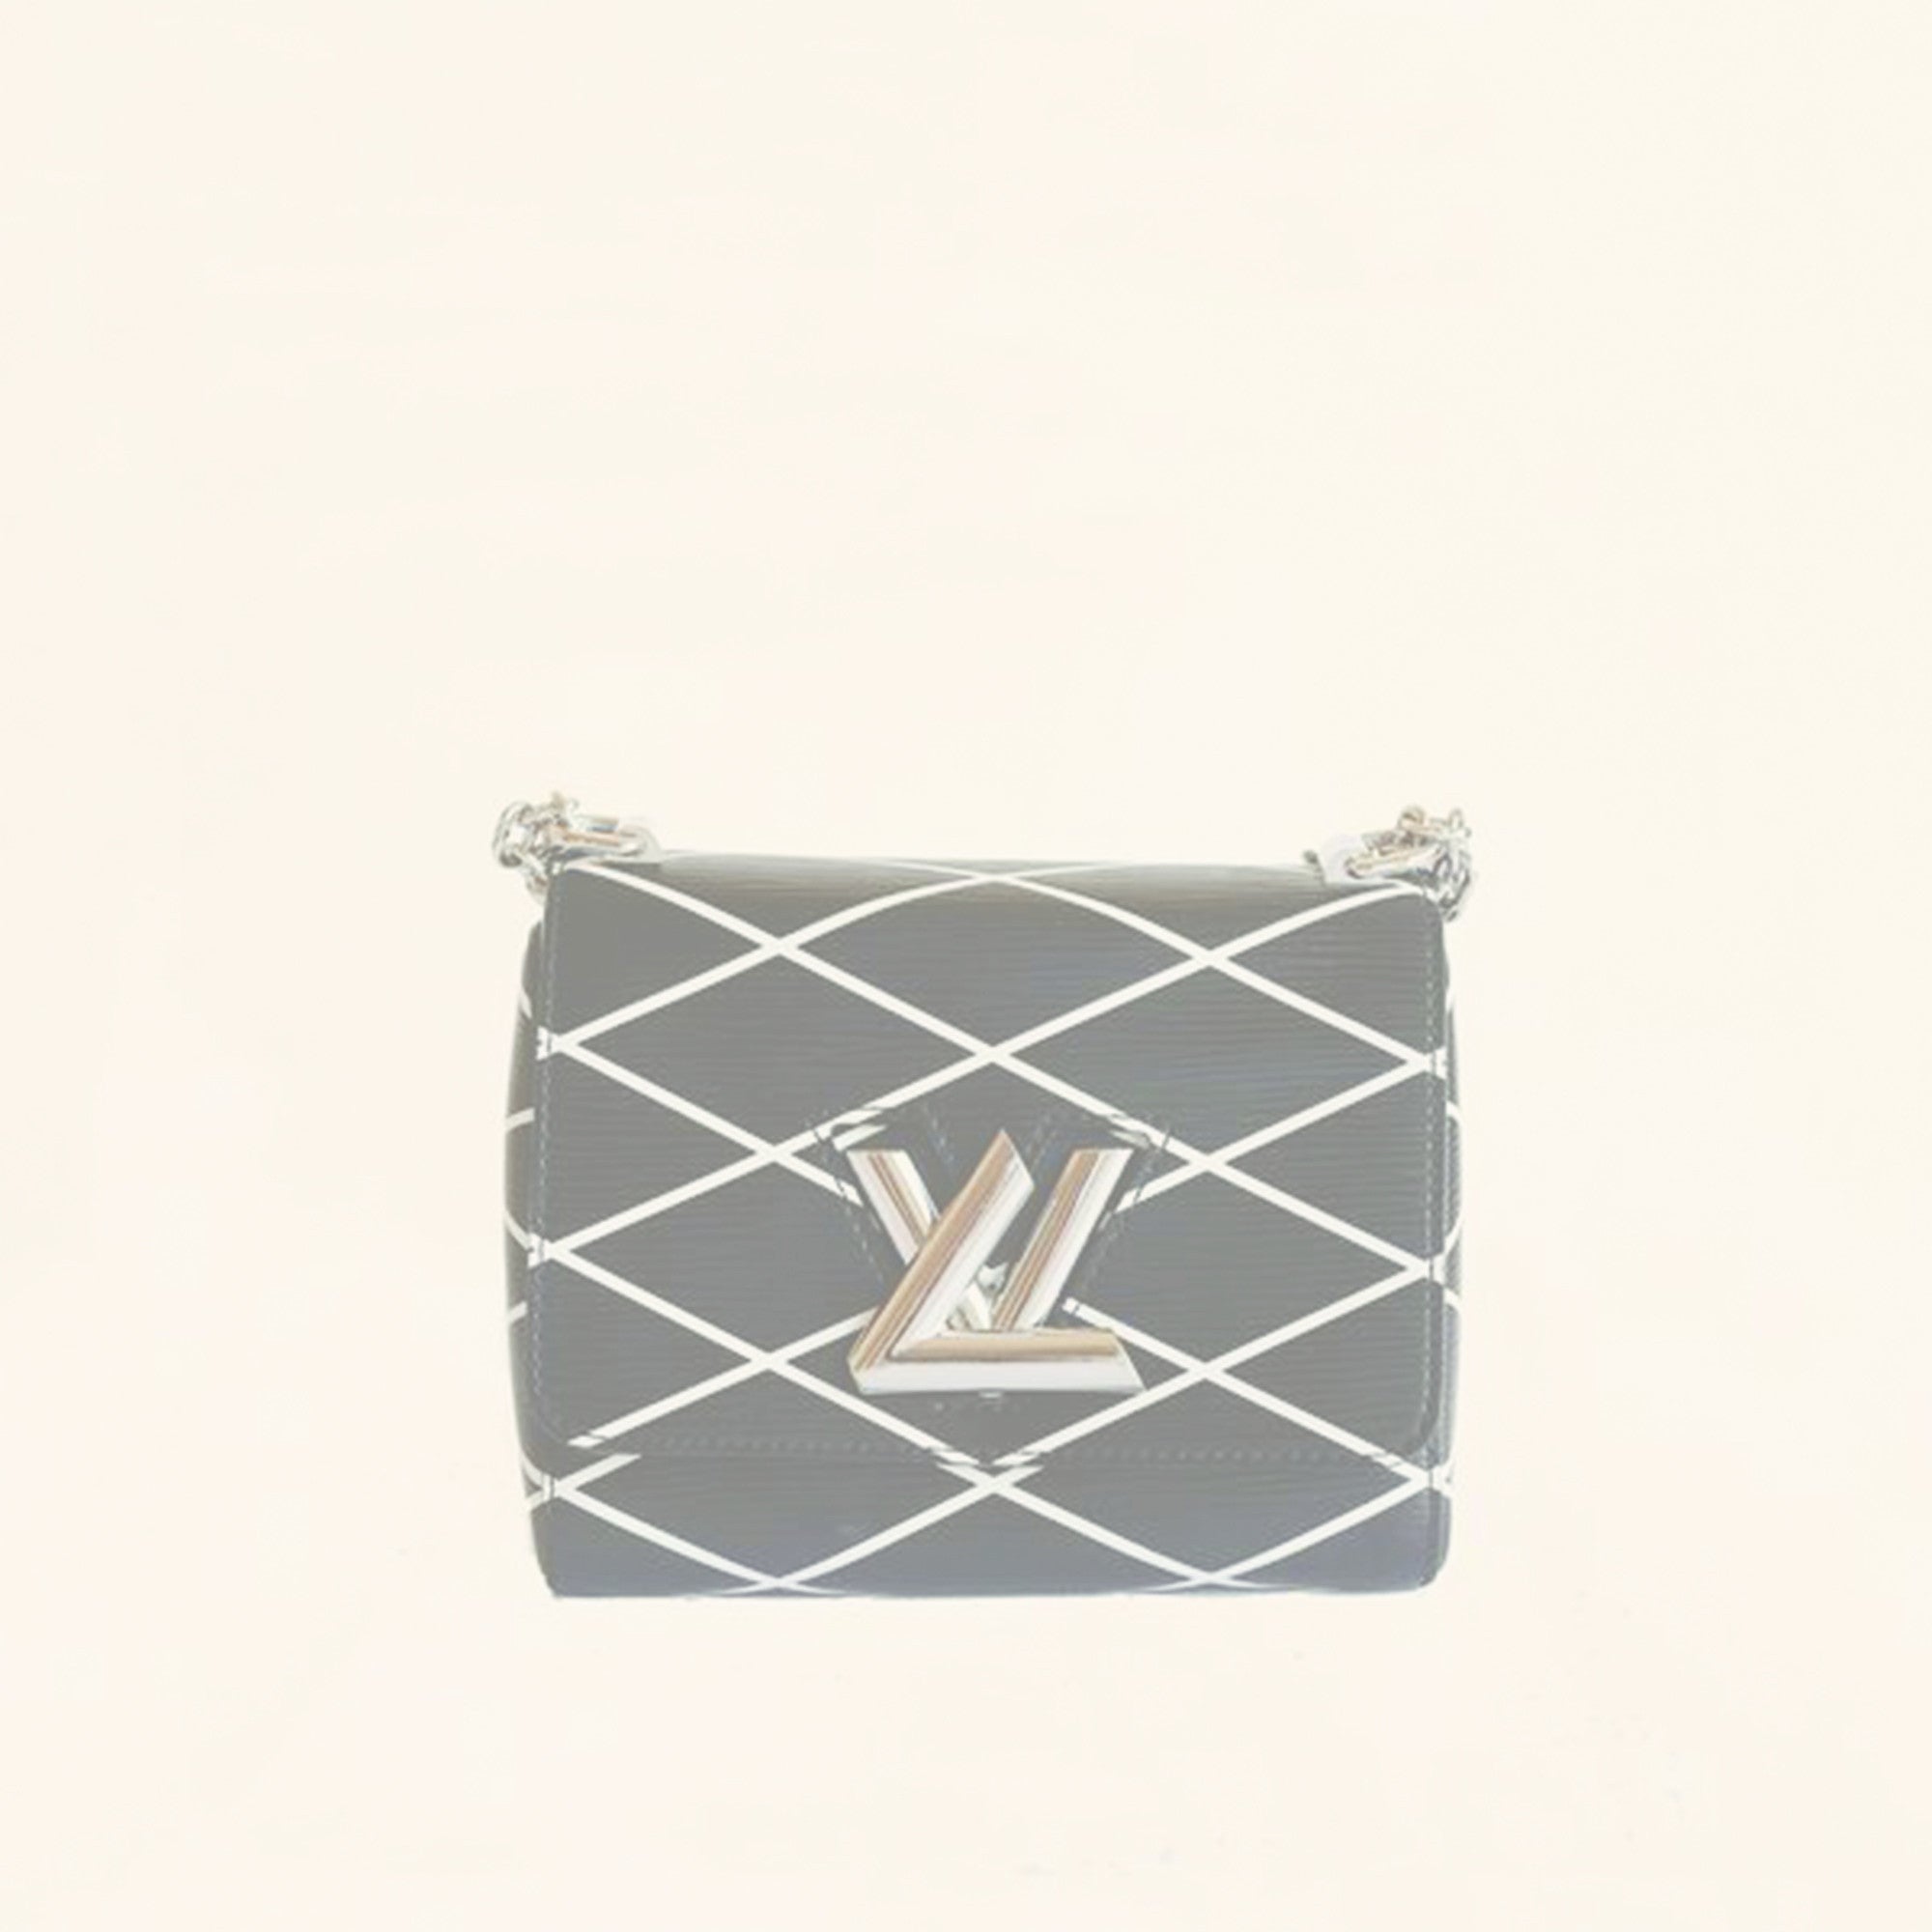 Louis Vuitton Wallet Styles: Timeless Looks Worth the Investment